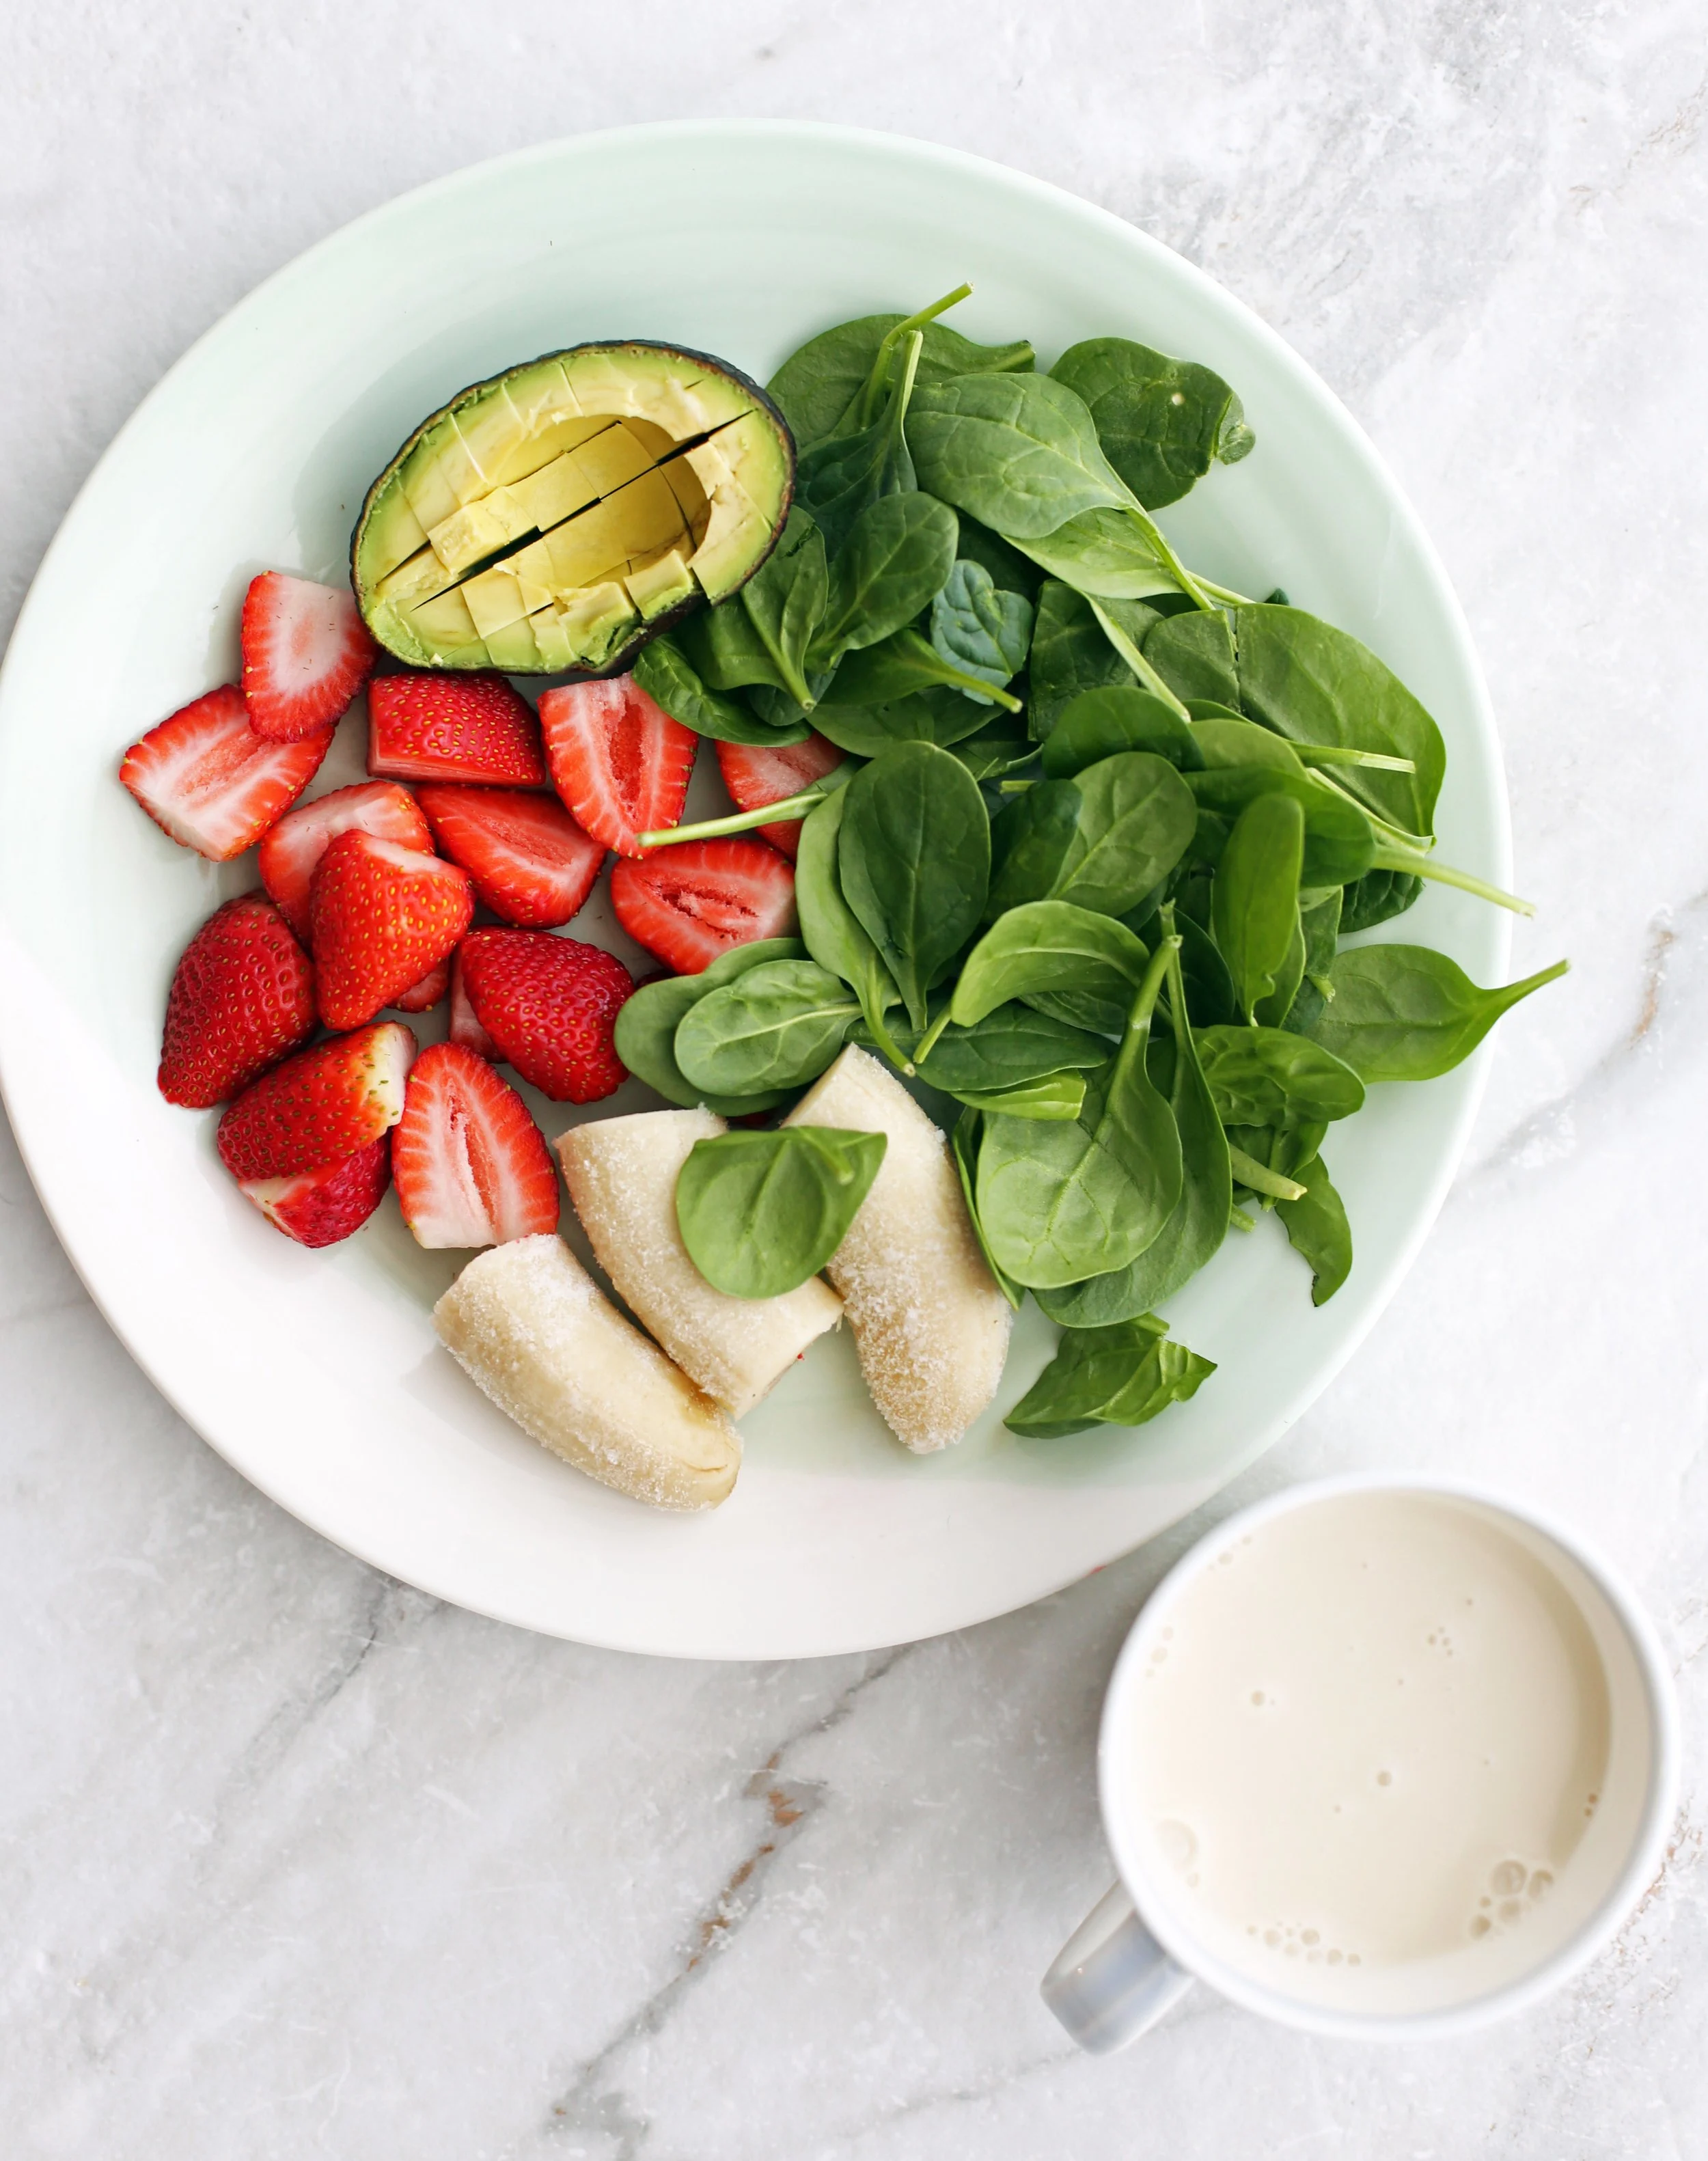 A plate of sliced strawberries, frozen banana, baby spinach, and half avocado with a cup of almond milk.